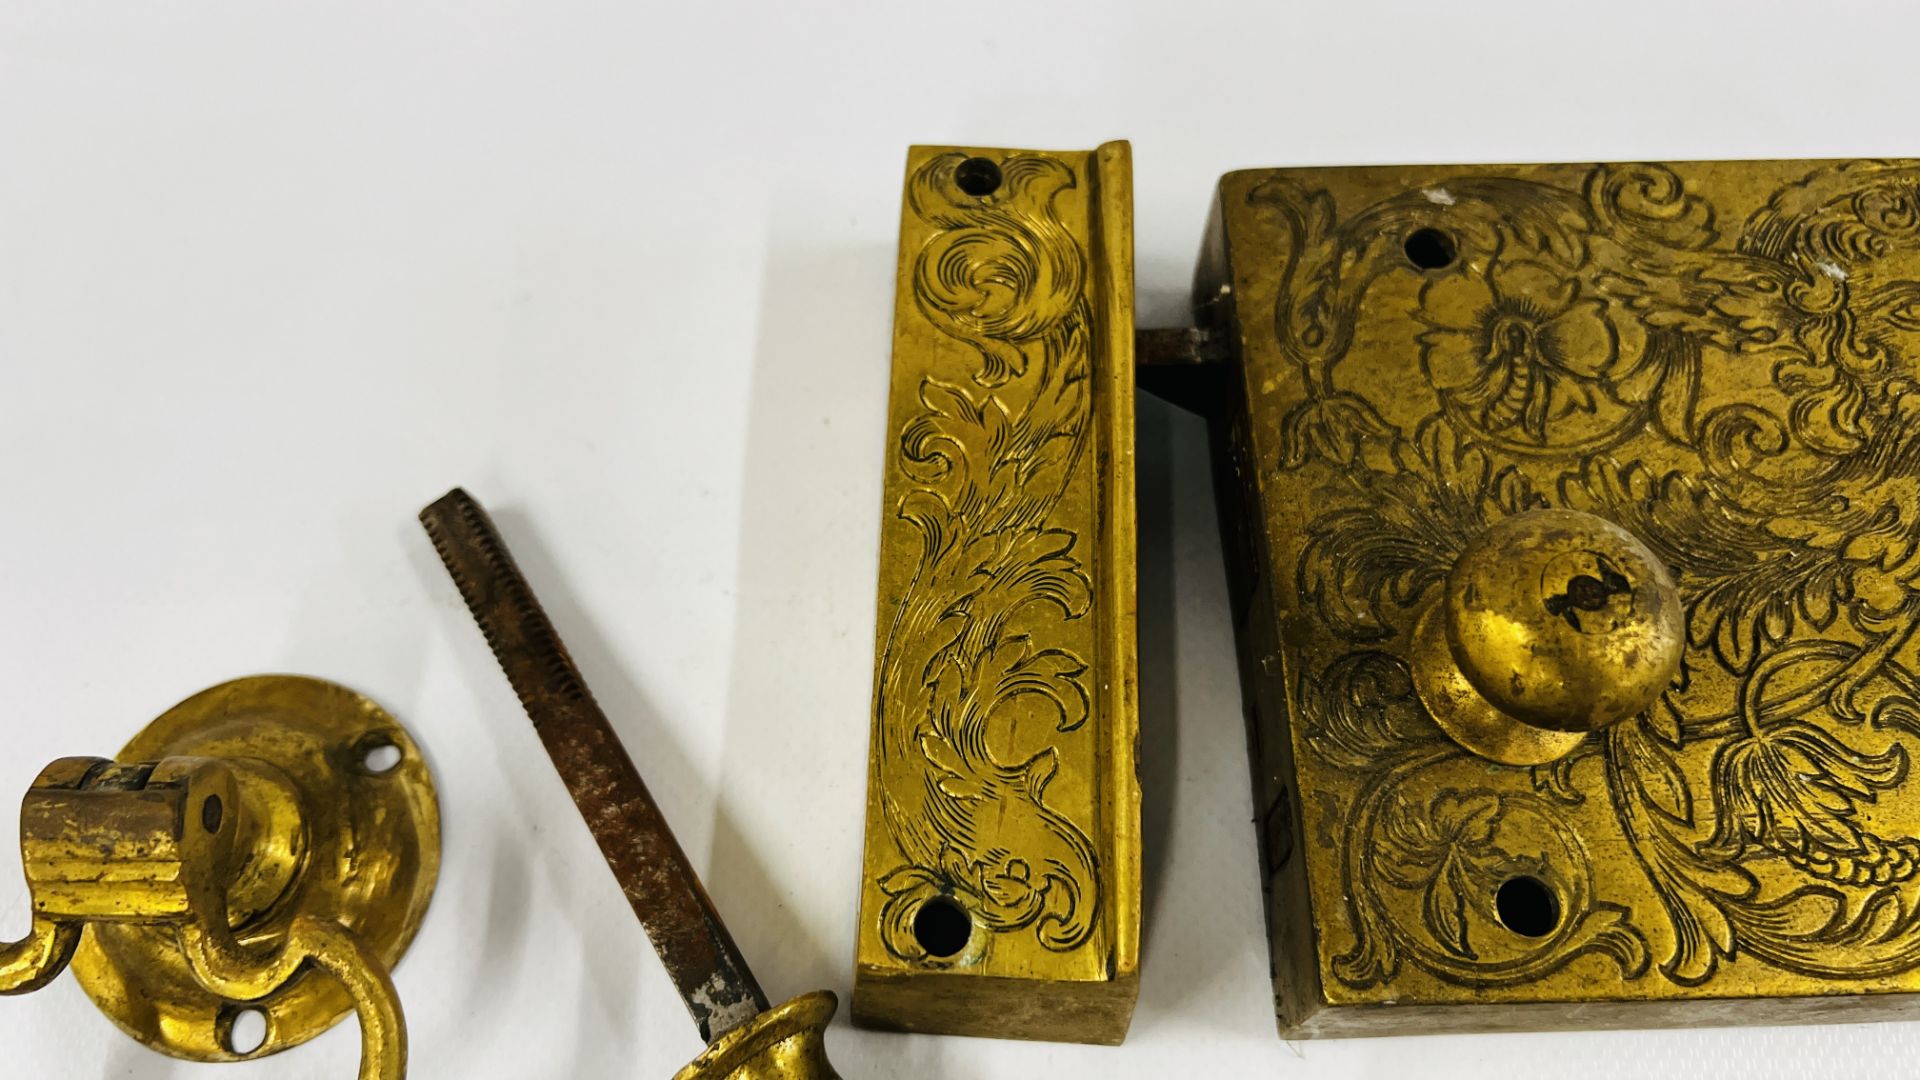 A PAIR OF ELABORATE ANTIQUE SOLID BRASS DOOR LOCKS PROBABLY C18th RETAINING THE ORIGINAL KEYS, - Image 4 of 12